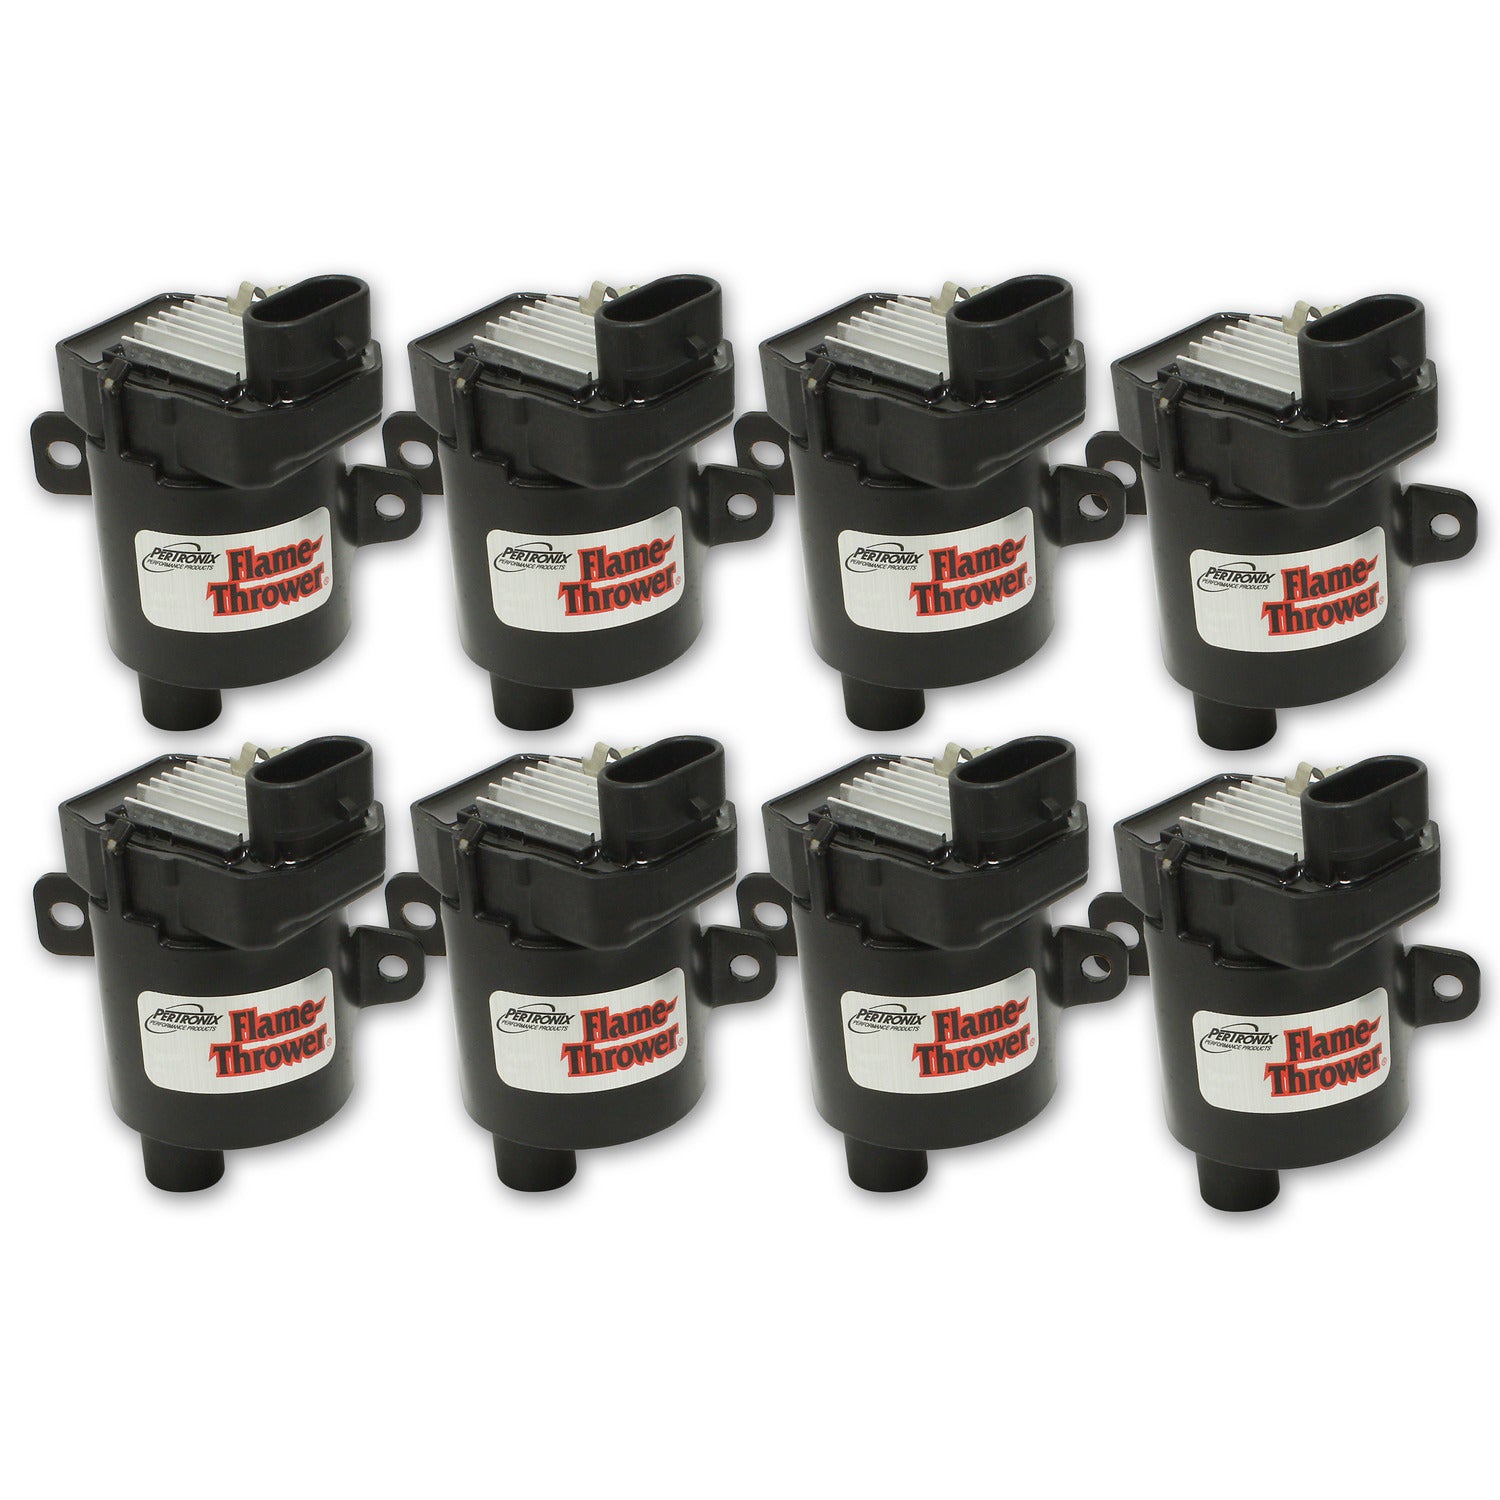 Pertronix 30848 Flame-Thrower Smart Ignition Performance Replacement Coil GM LS Truck Engines set of 8